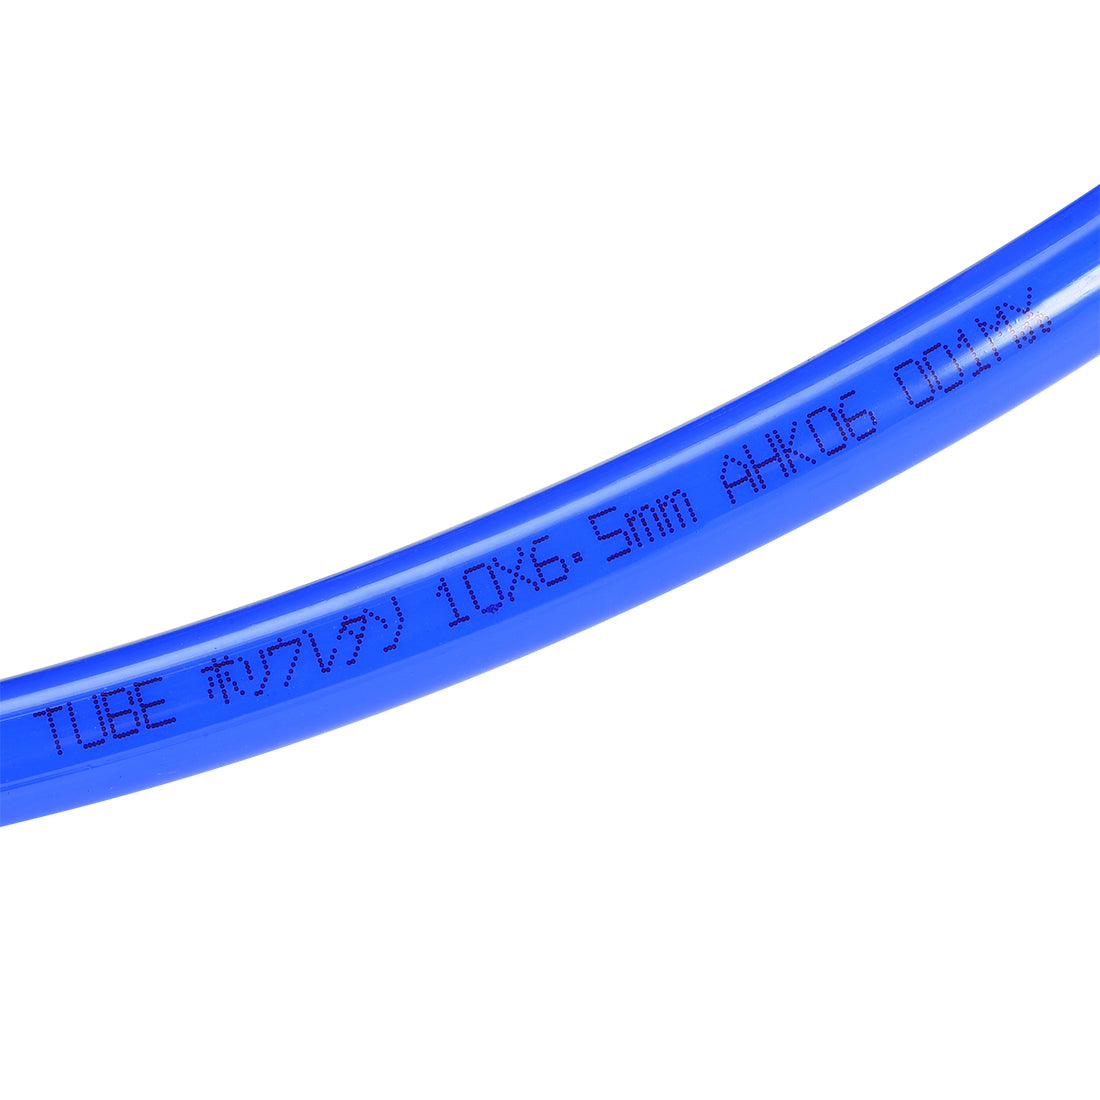 uxcell Uxcell Pneumatic Hose Tubing,10mm OD 6.5mm ID,Polyurethane PU Air Hose Pipe Tube,4 Meter 13.12ft,Blue